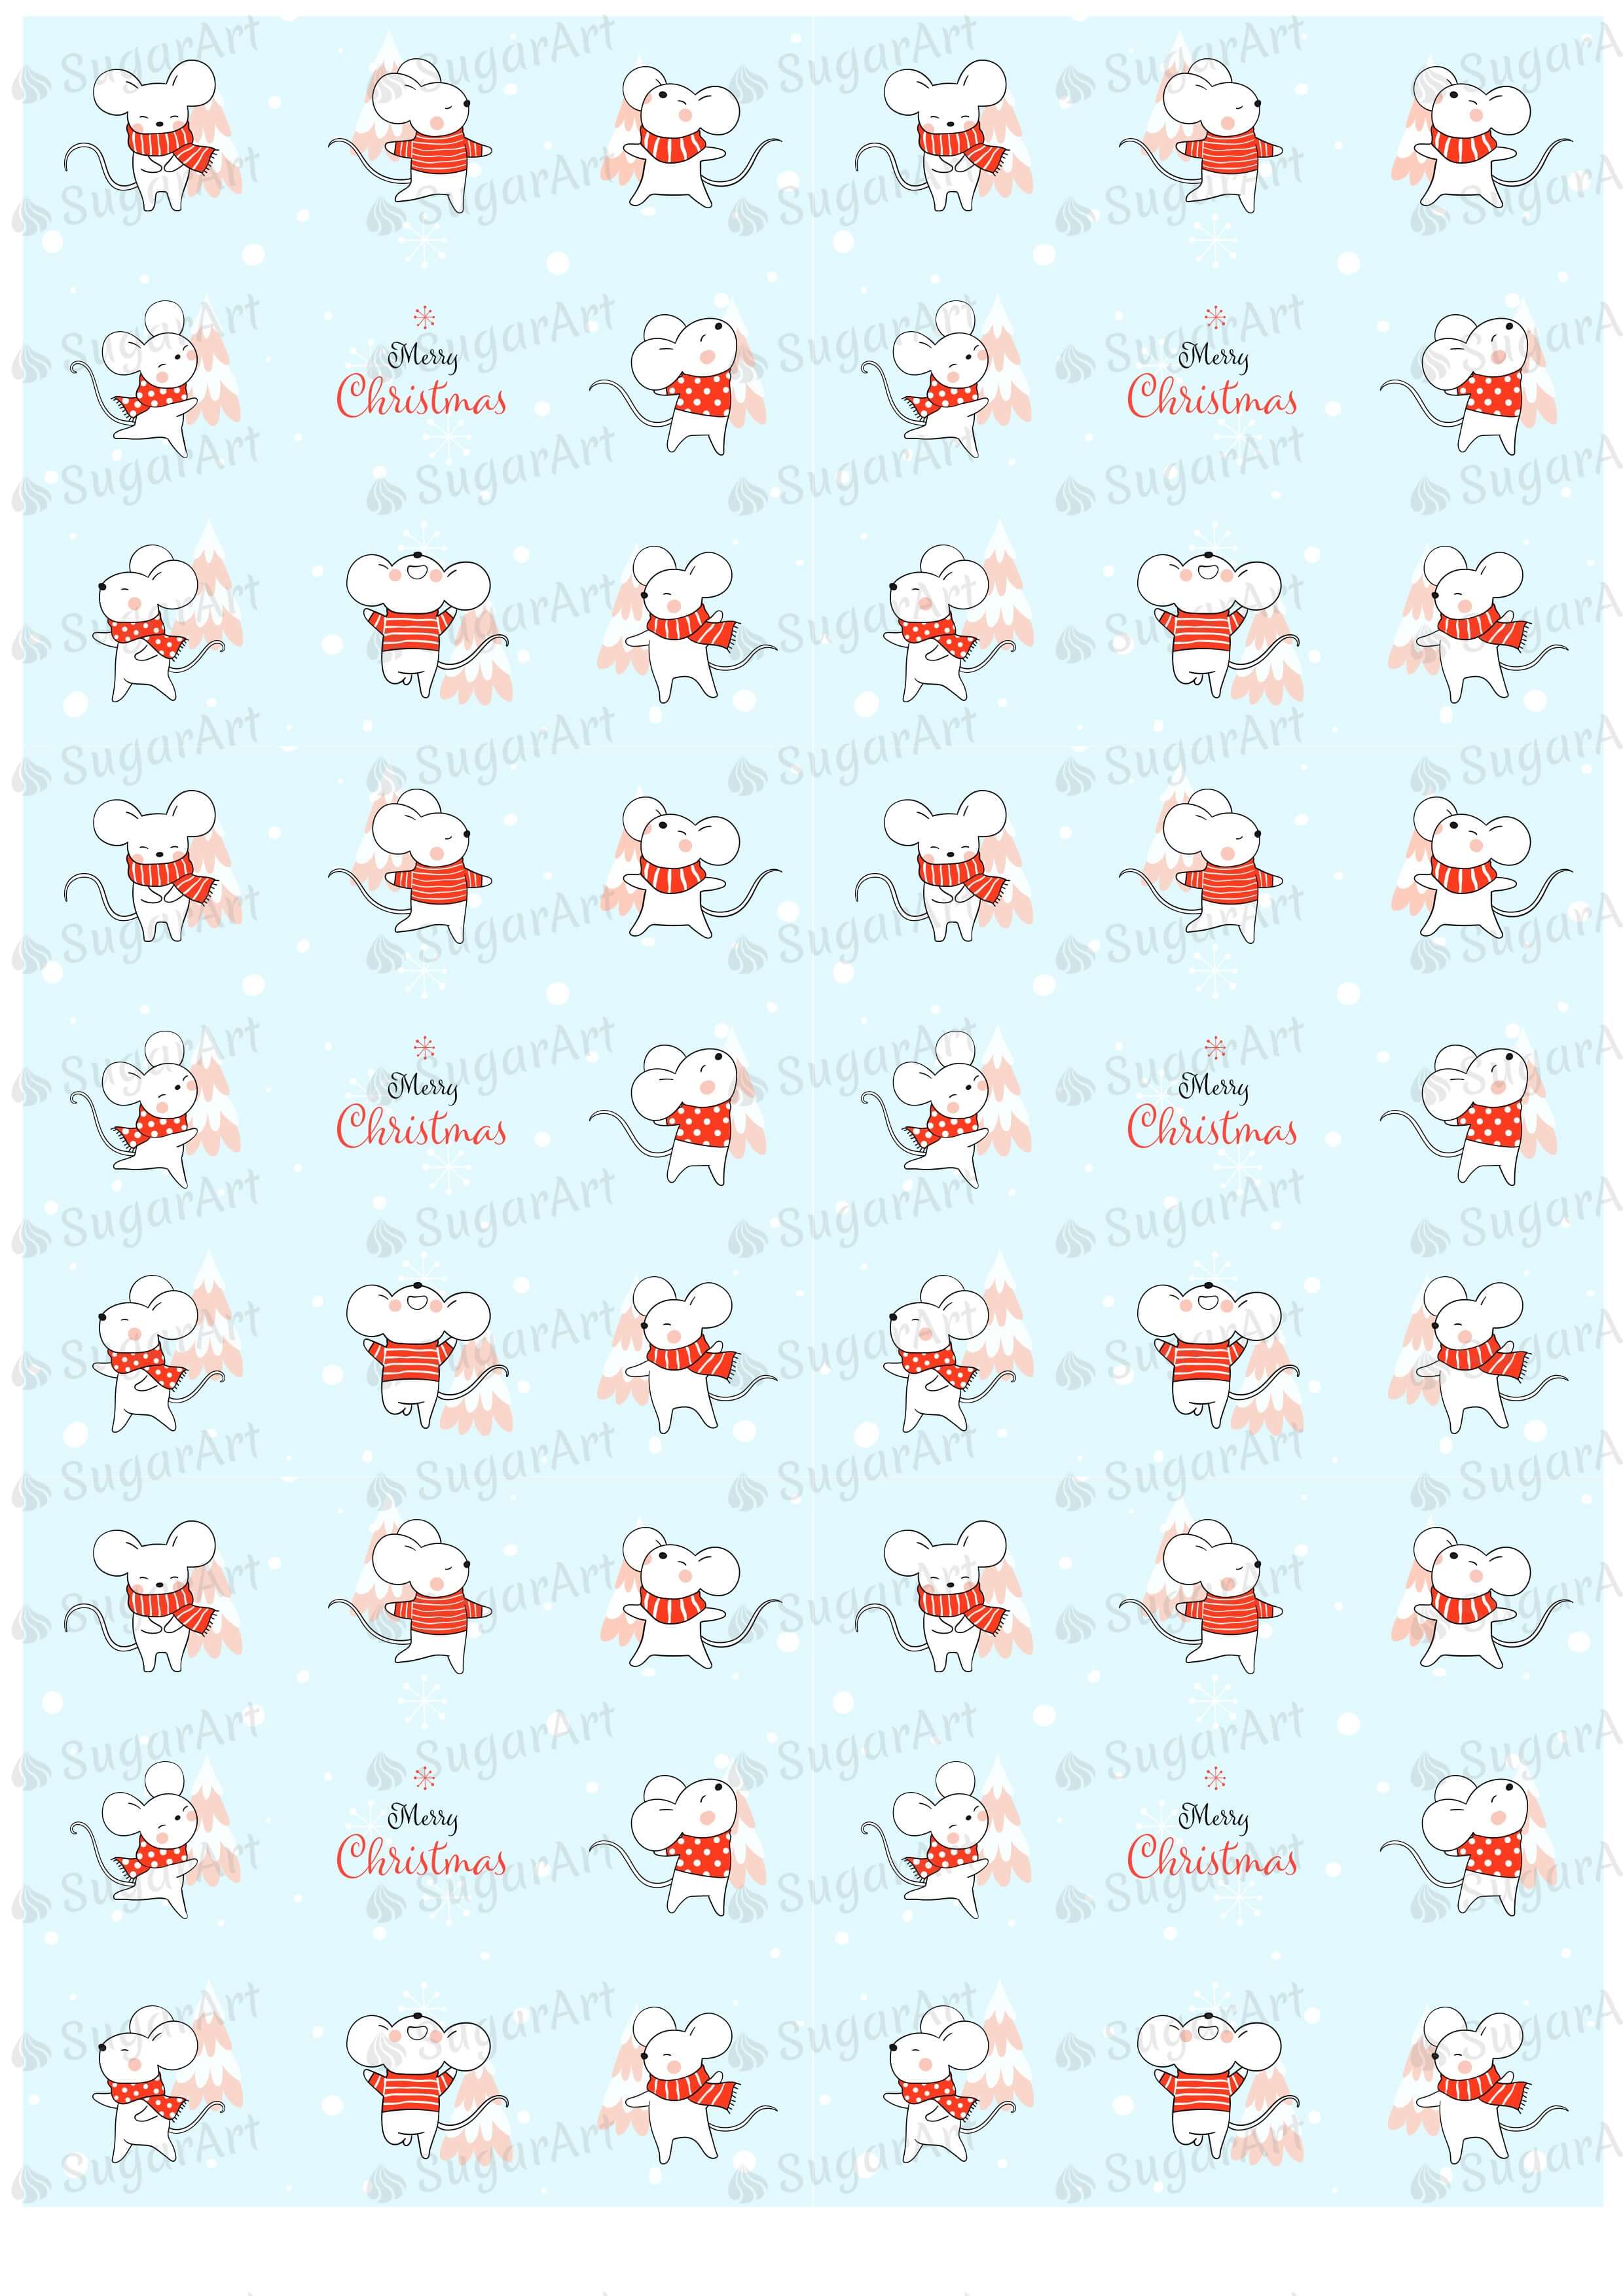 Merry Christmas Design with Cute Rats - HSA083.